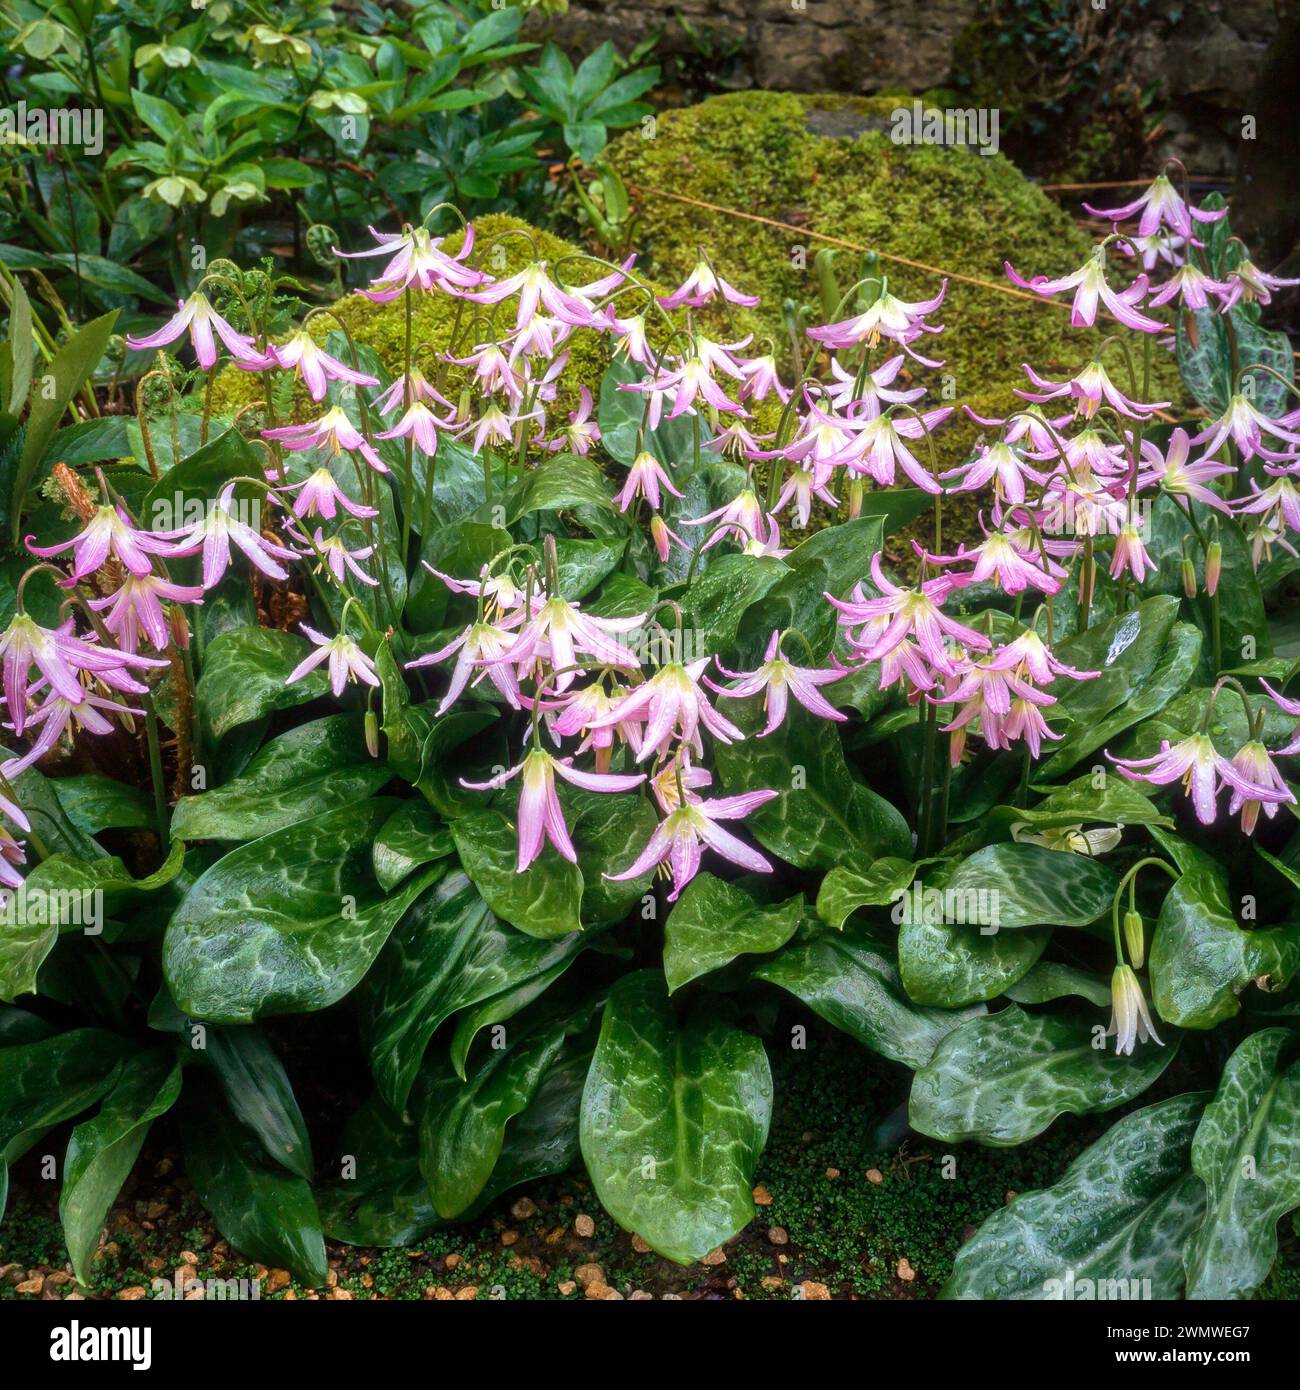 Wet Erythronium Revolutum lily with pink flowers growing in English garden, England, UK Stock Photo